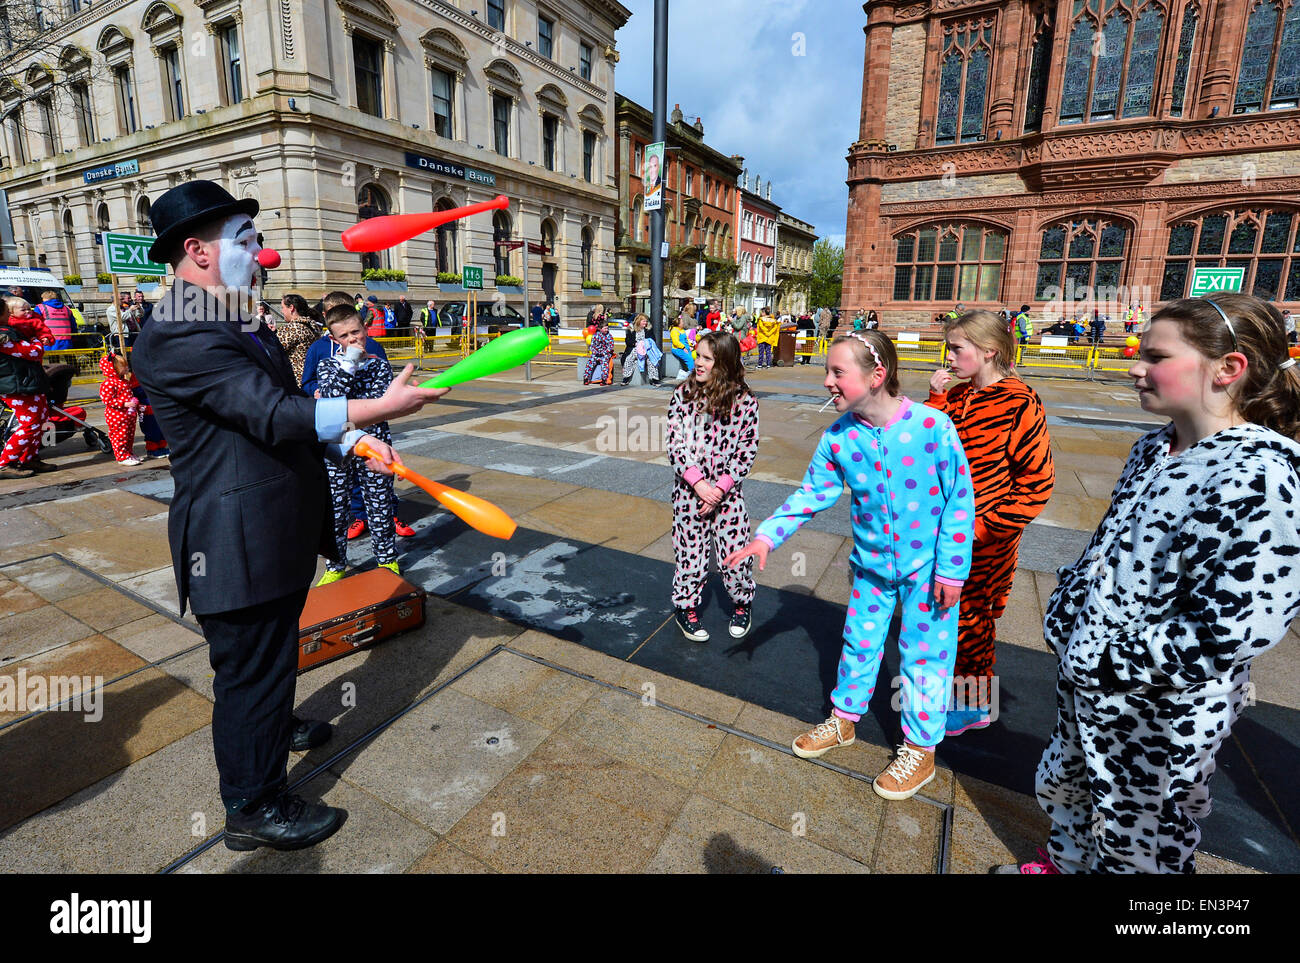 Clown with painted face, red nose and wearing a hat entertaining children dressed in onesies in the Guildhall Square, Derry, Lon Stock Photo